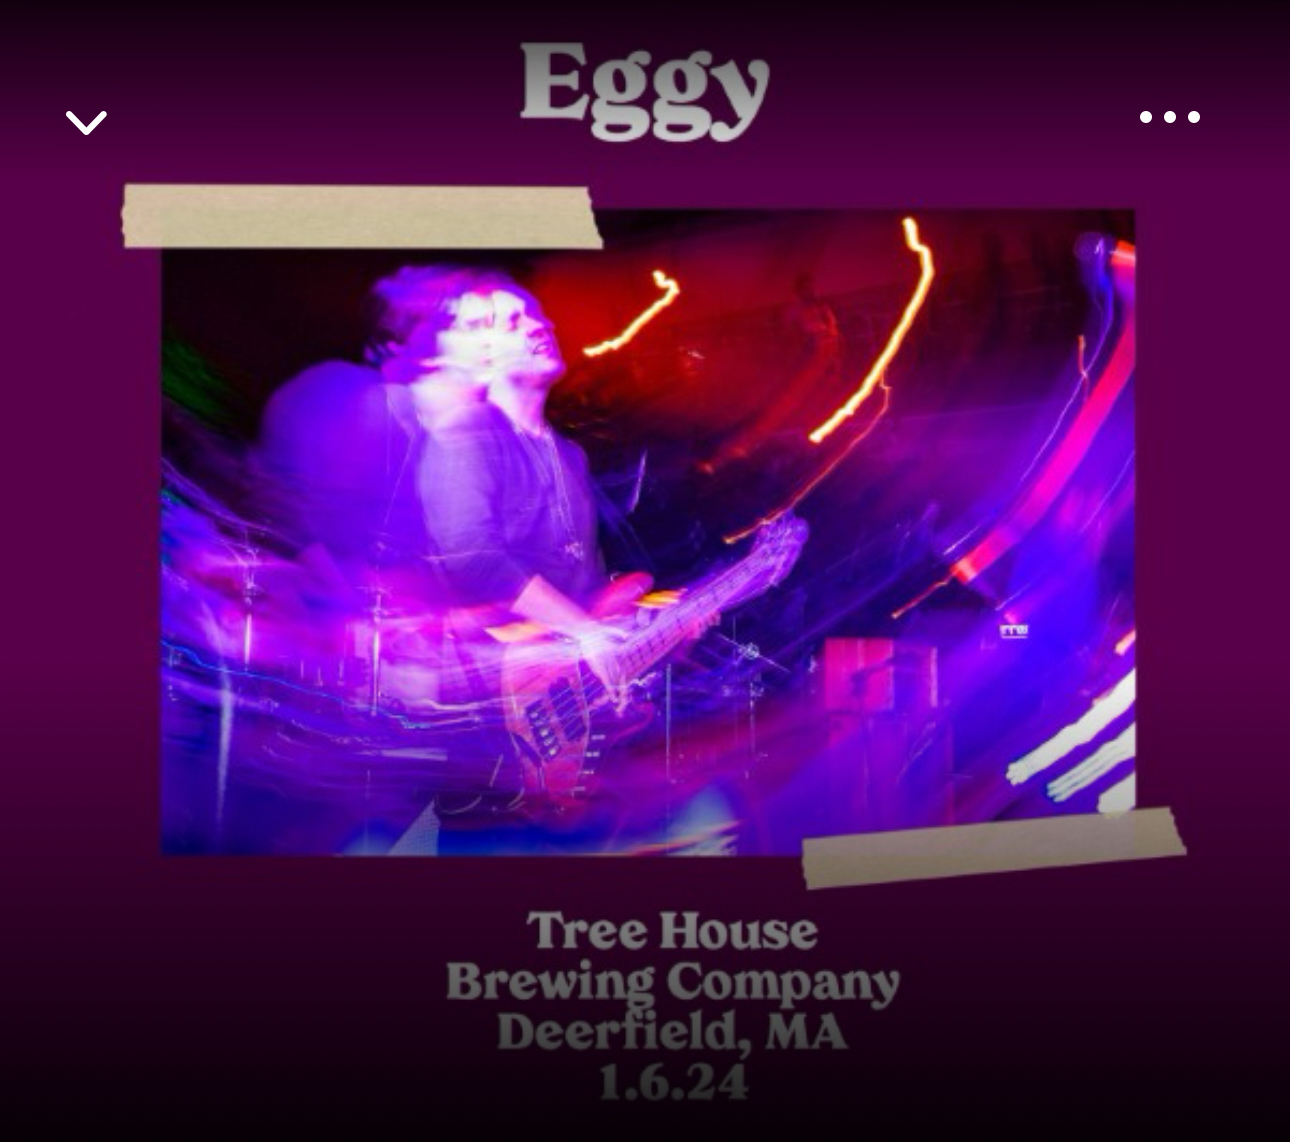 Concert photo of a guitarist on stage with motion blur, against a dark background with light trails. Text overlay indicates “Eggy” at “Tree House Brewing Company, Deerfield, MA, 1.6.24”.